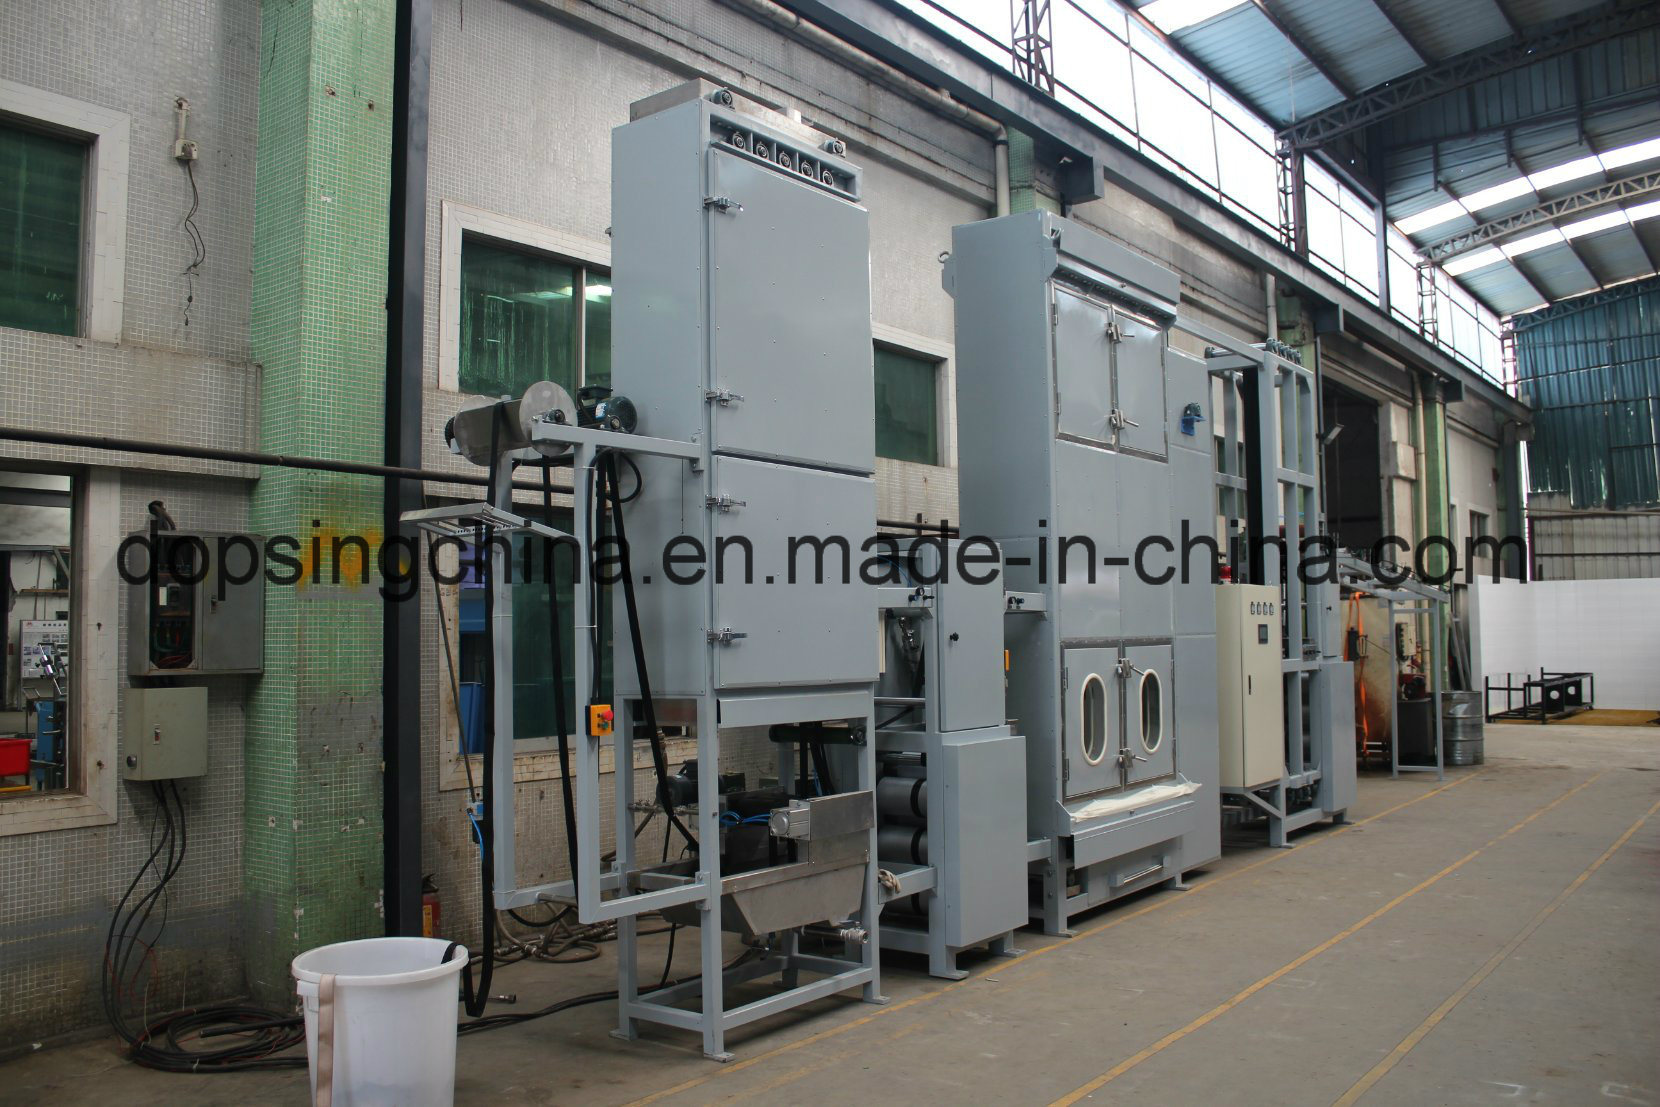 2f0j00CmdQkhfzlnqb600mm-Cargo-Sling-Webbings-Dyeing-and-Finishing-Machine-Prices